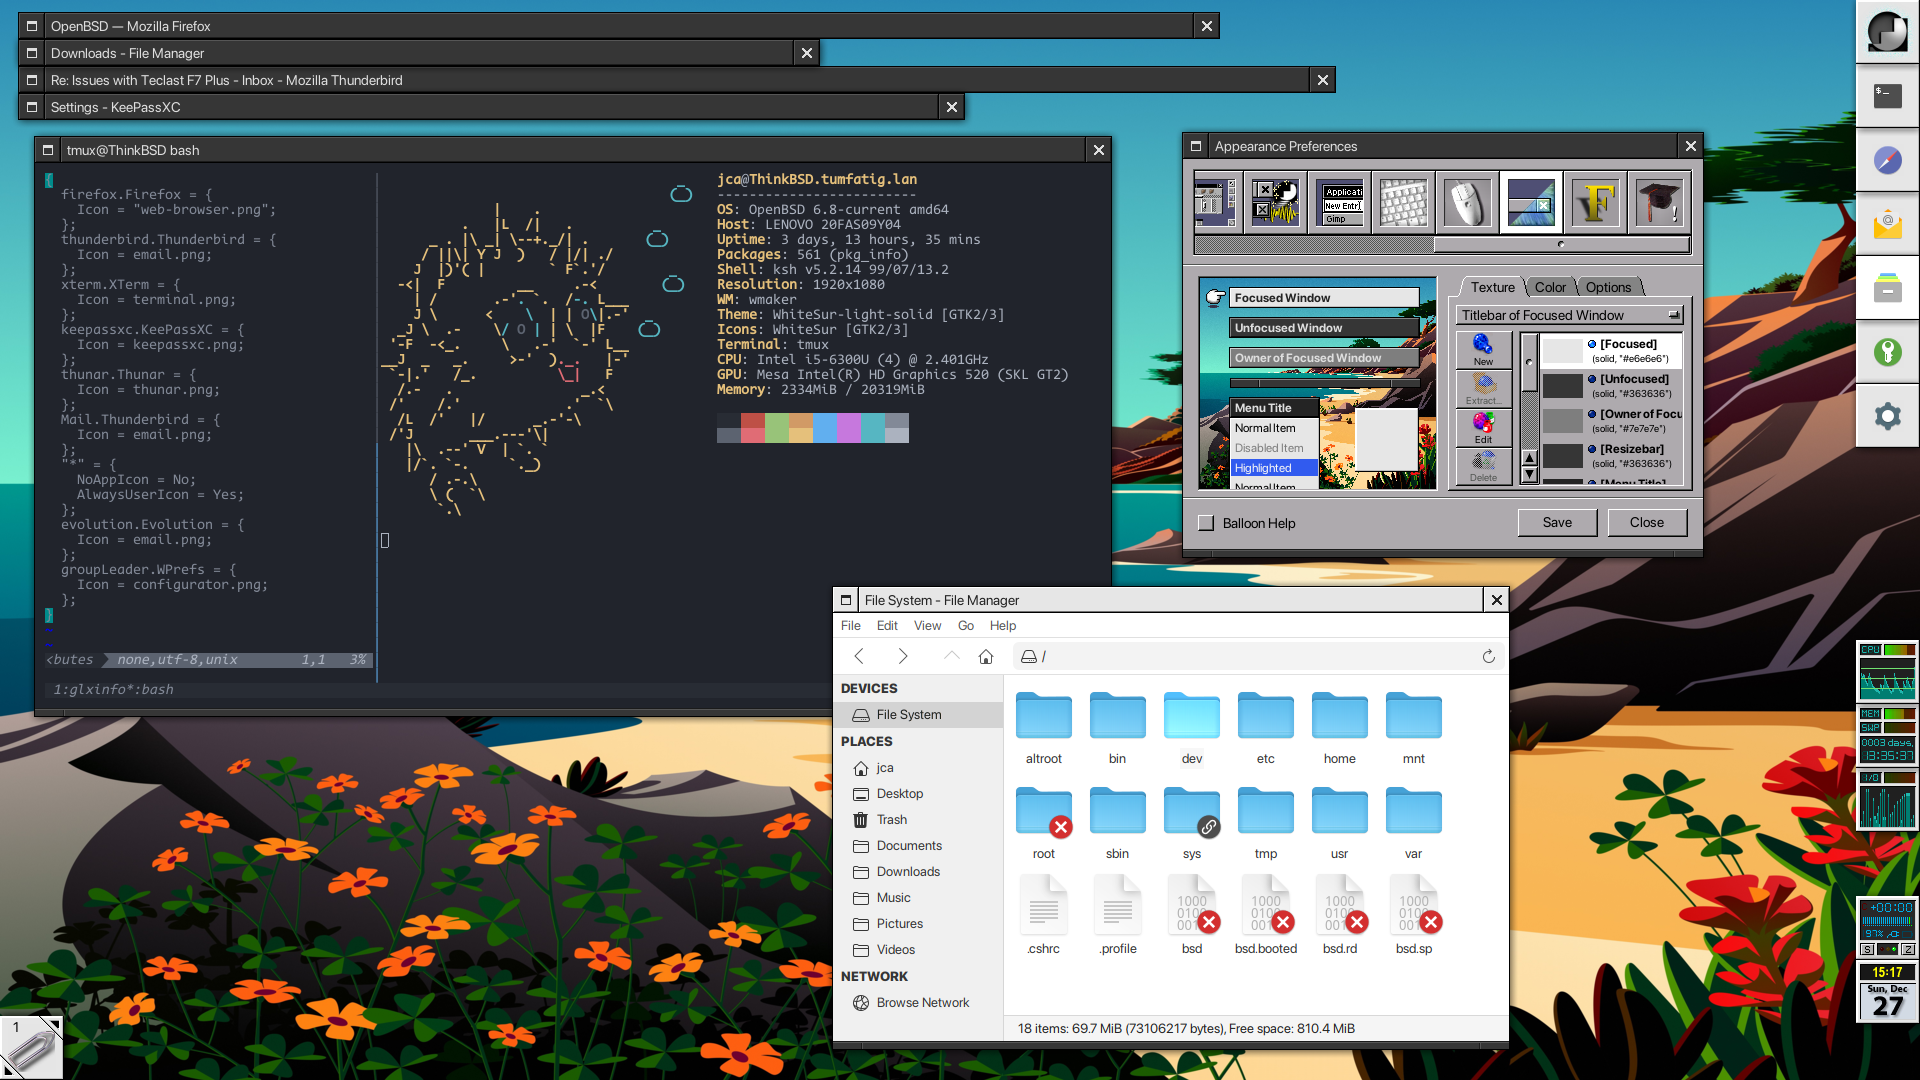 WindowMaker on OpenBSD with MacOS Big Sur look